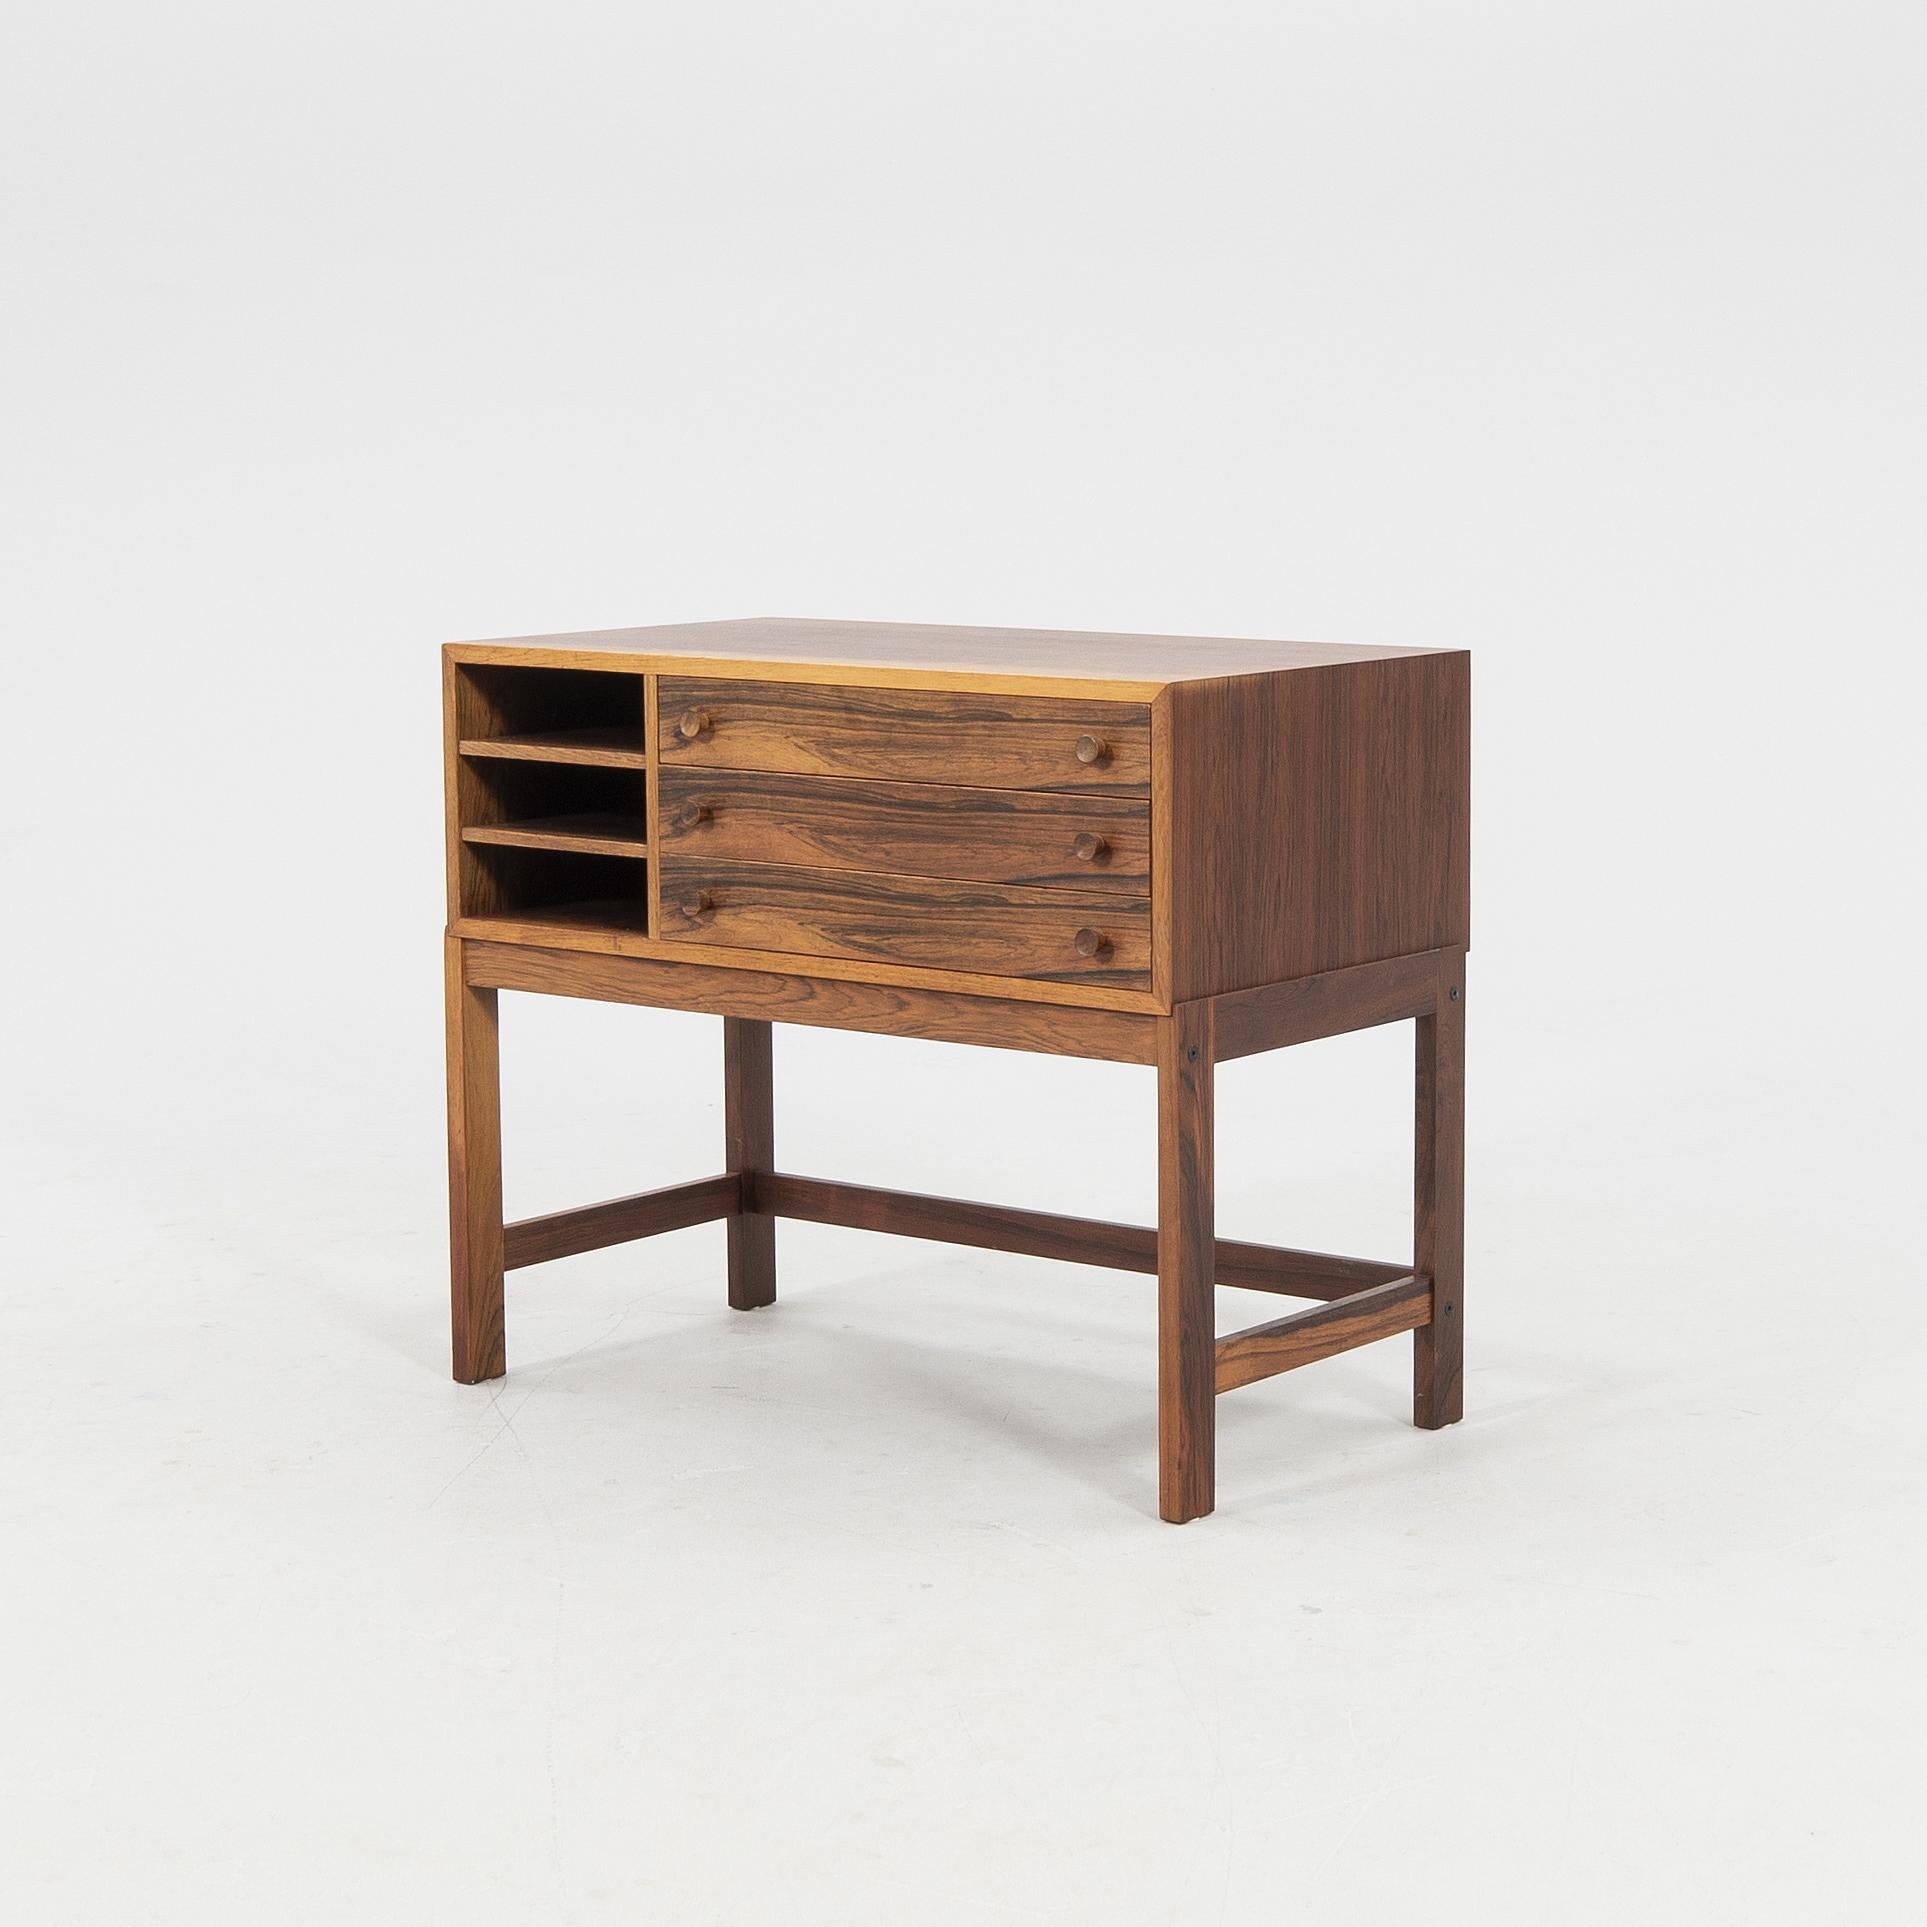  Rare teak sideboard in the style of Sven Engström & Gunnar Myrstrand made in Sweden around  1960.
 a pair available can be used also as nightstands
Good condition
Price for 1 sideboard